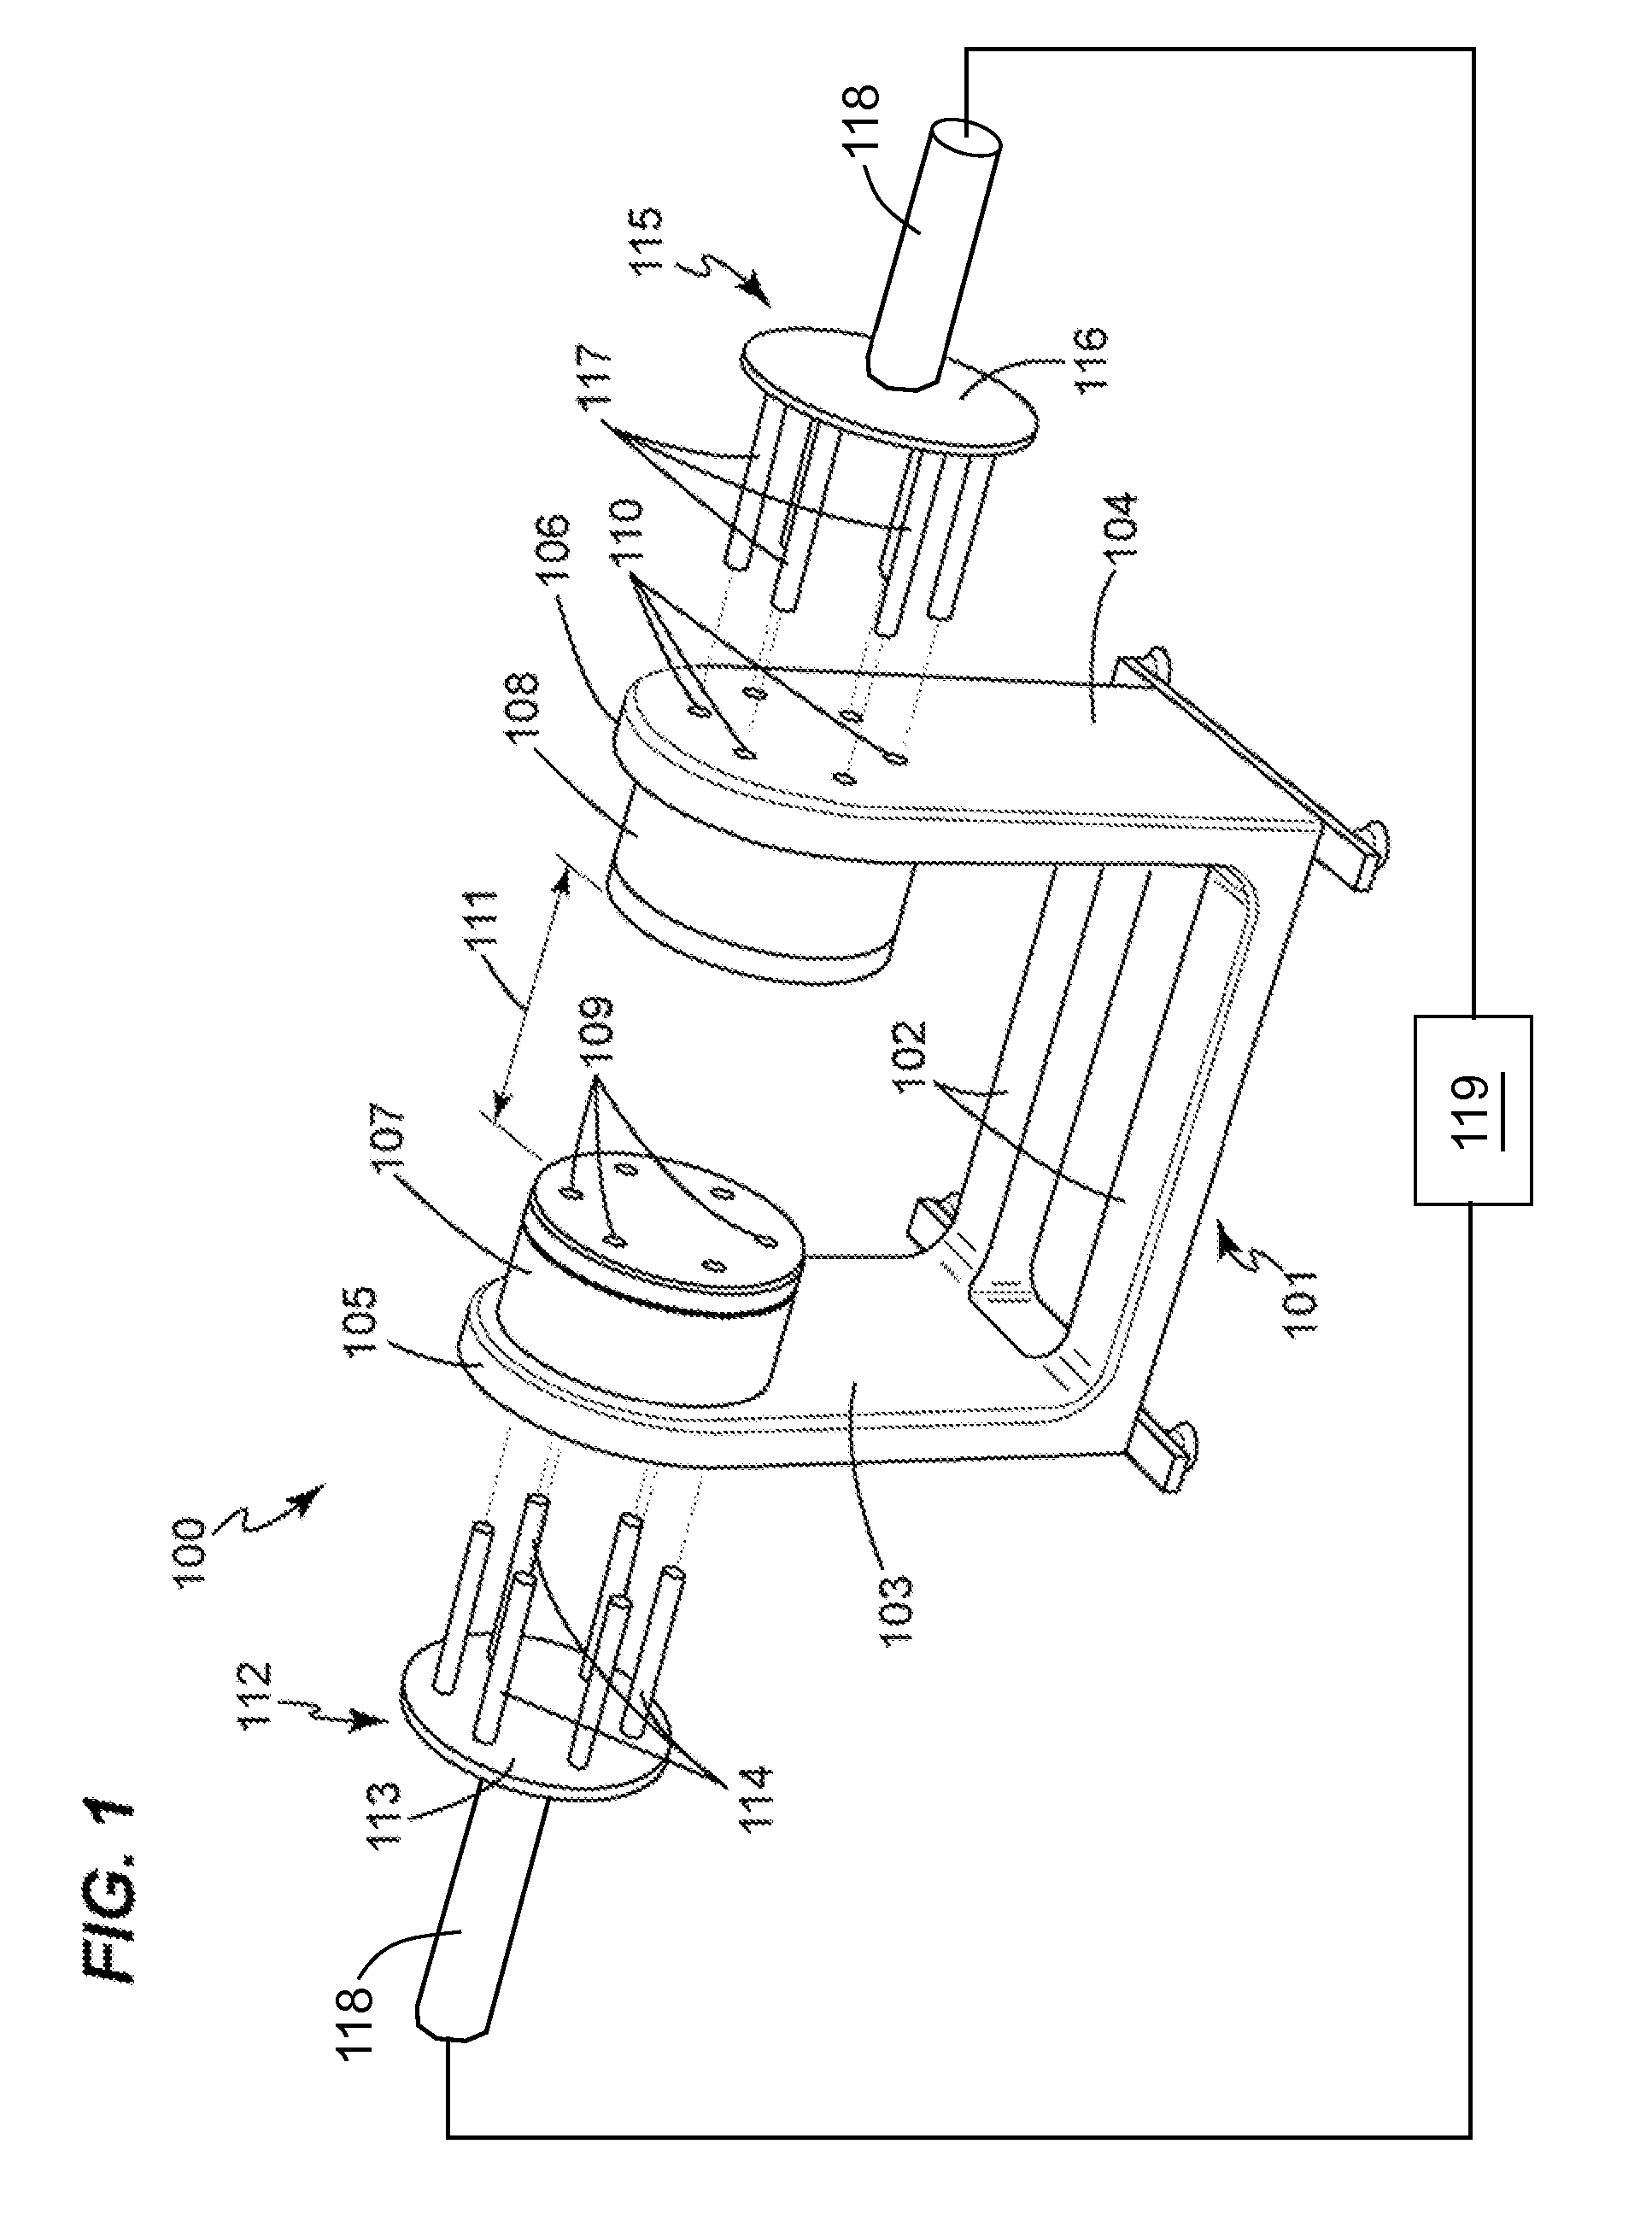 Apparatus and method for varying magnetic field strength in magnetic resonance measurements